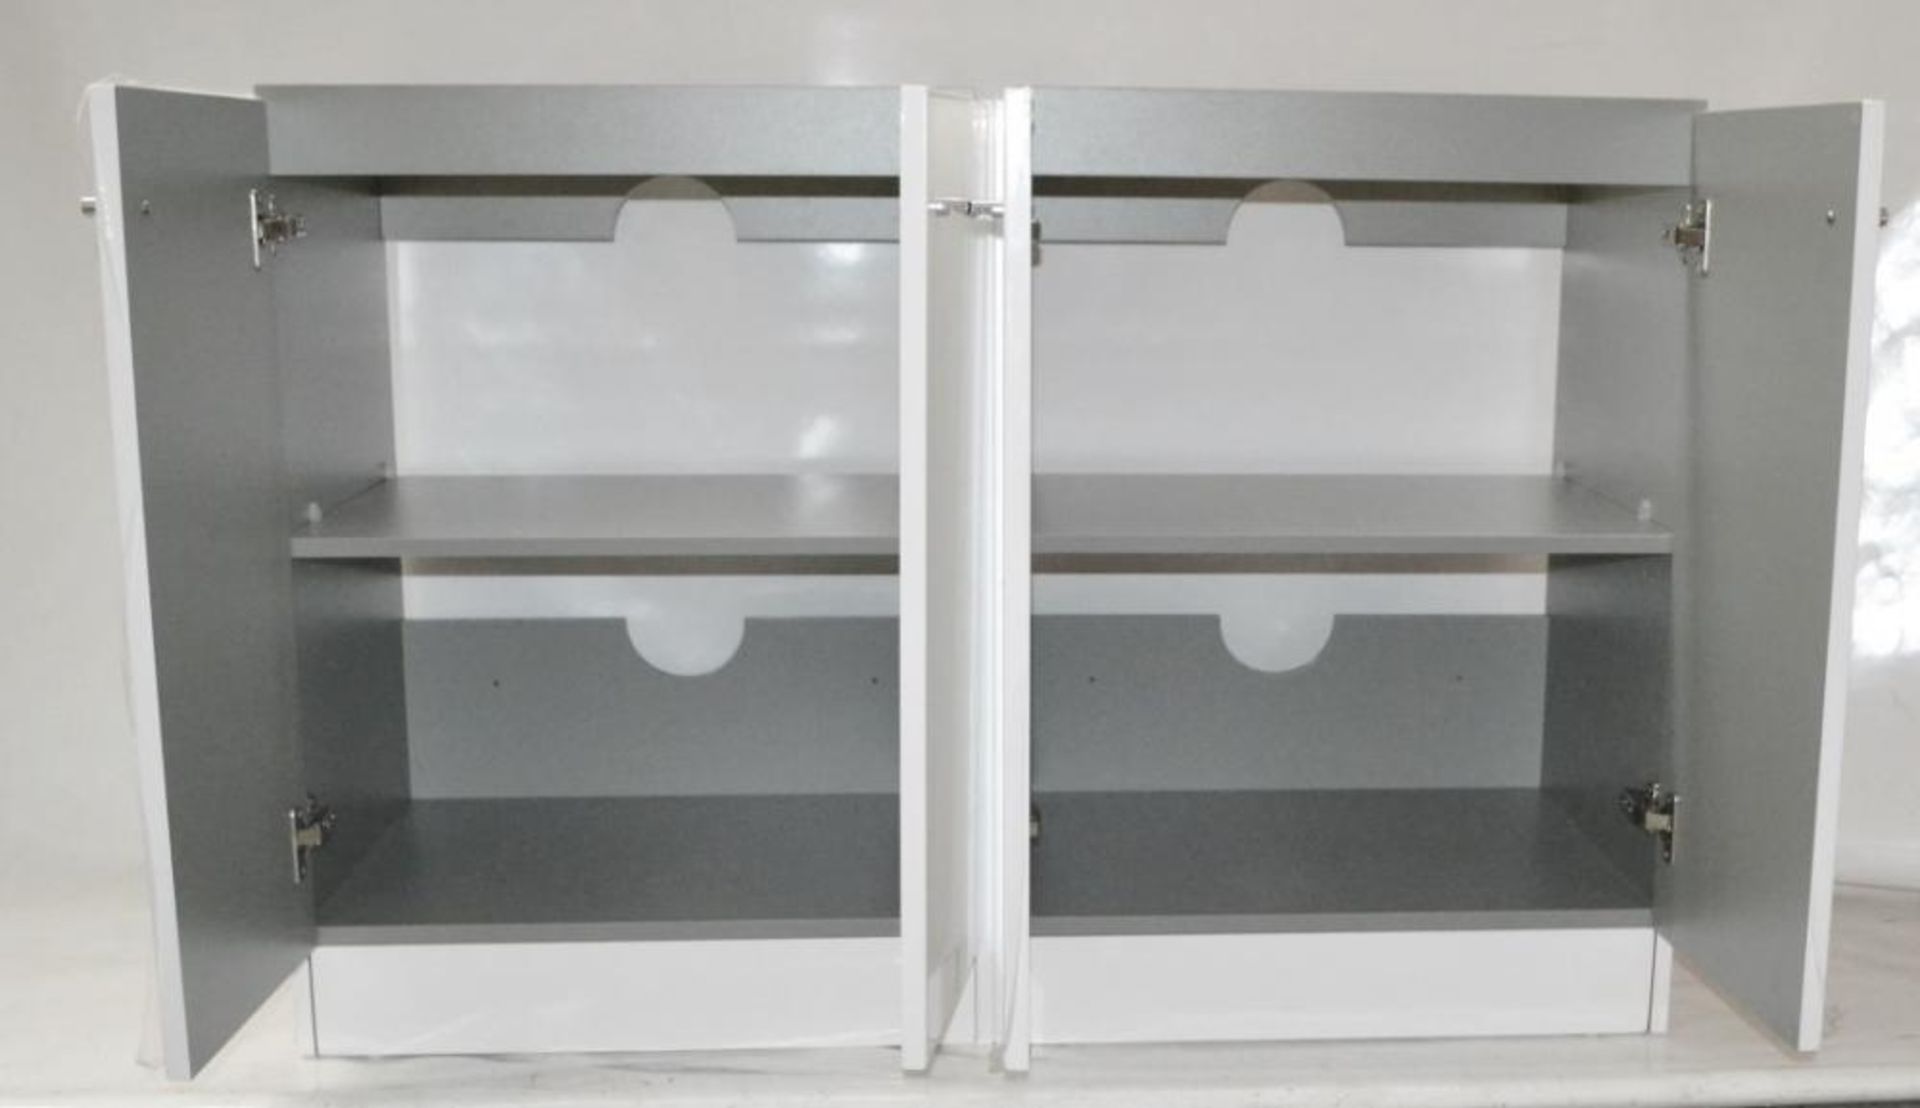 1 x Gloss White 1200mm 4-Door Double Basin Freestanding Bathroom Cabinet - New & Boxed Stock - CL307 - Image 3 of 7